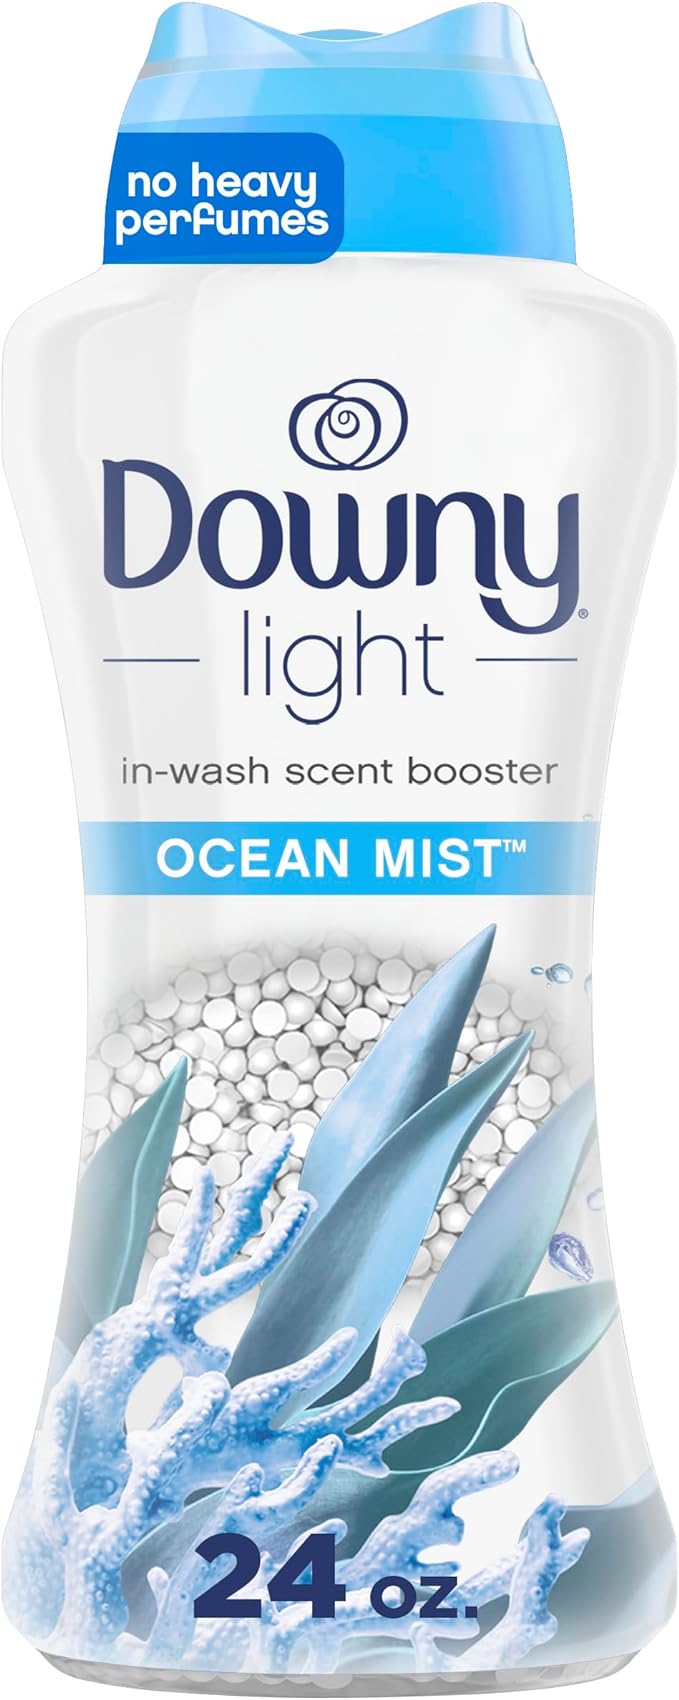 Downy Light Laundry Scent Booster Beads for Washer, Ocean Mist, 680 Grams, with No Heavy Perfumes